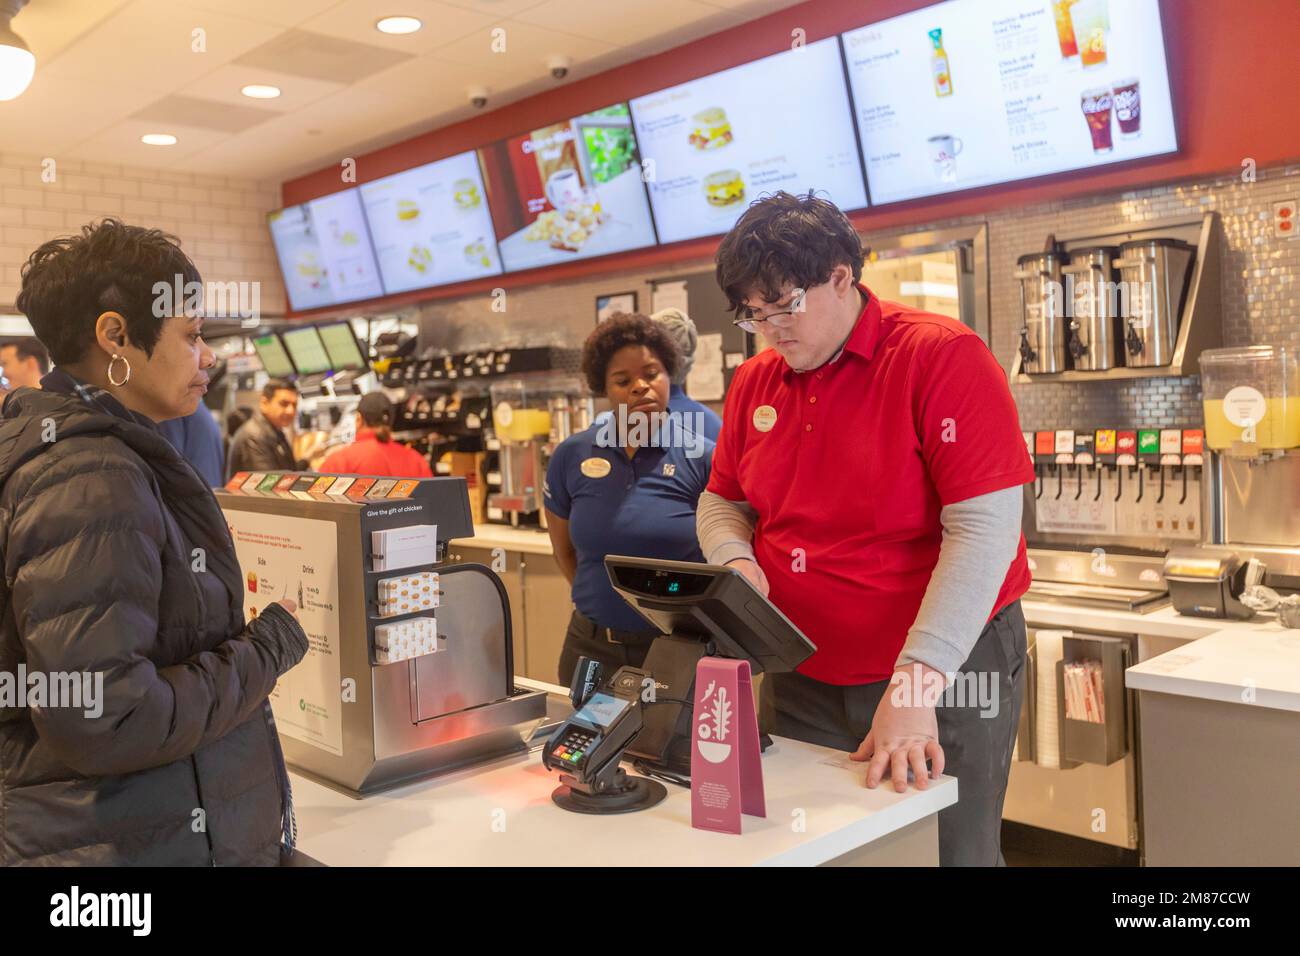 Livonia, Michigan - Workers at Chick-fil-A, on the day of the restaurant's grand opening. Workers in red shirts are the store's new staff, while those Stock Photo